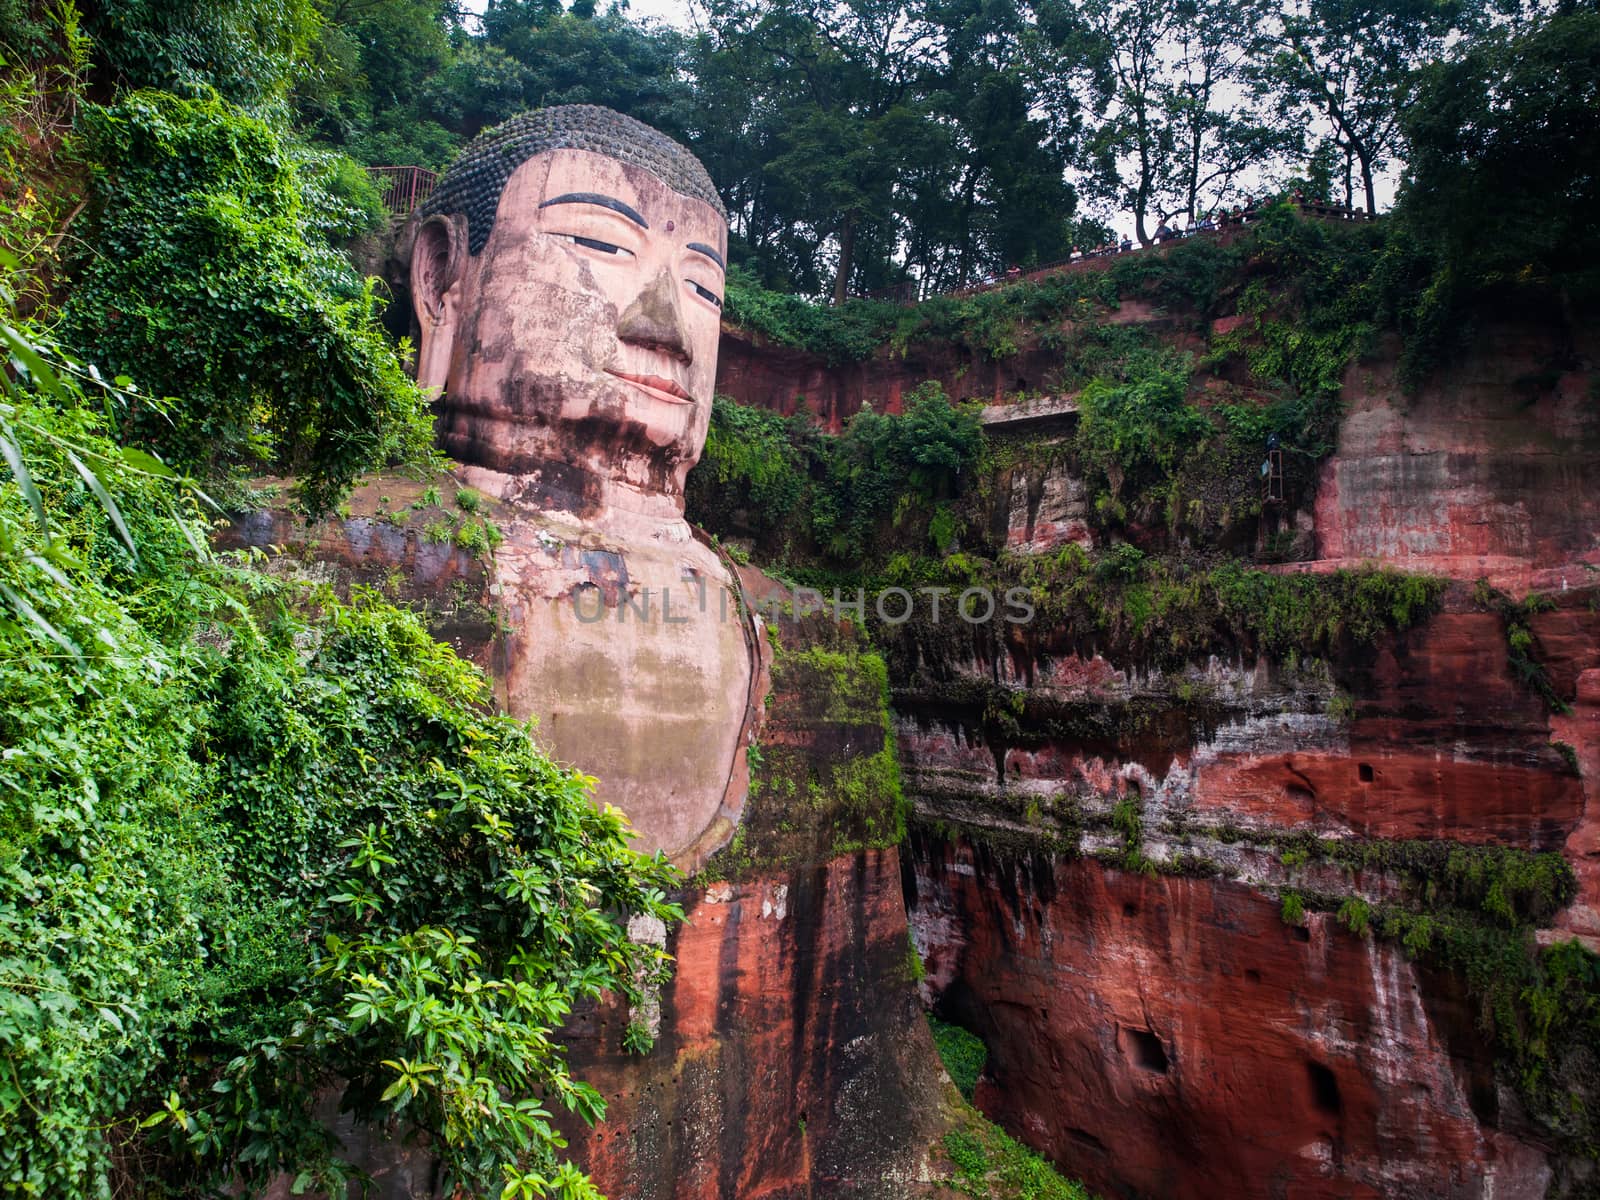 Dafo - Giant Budha by pyty